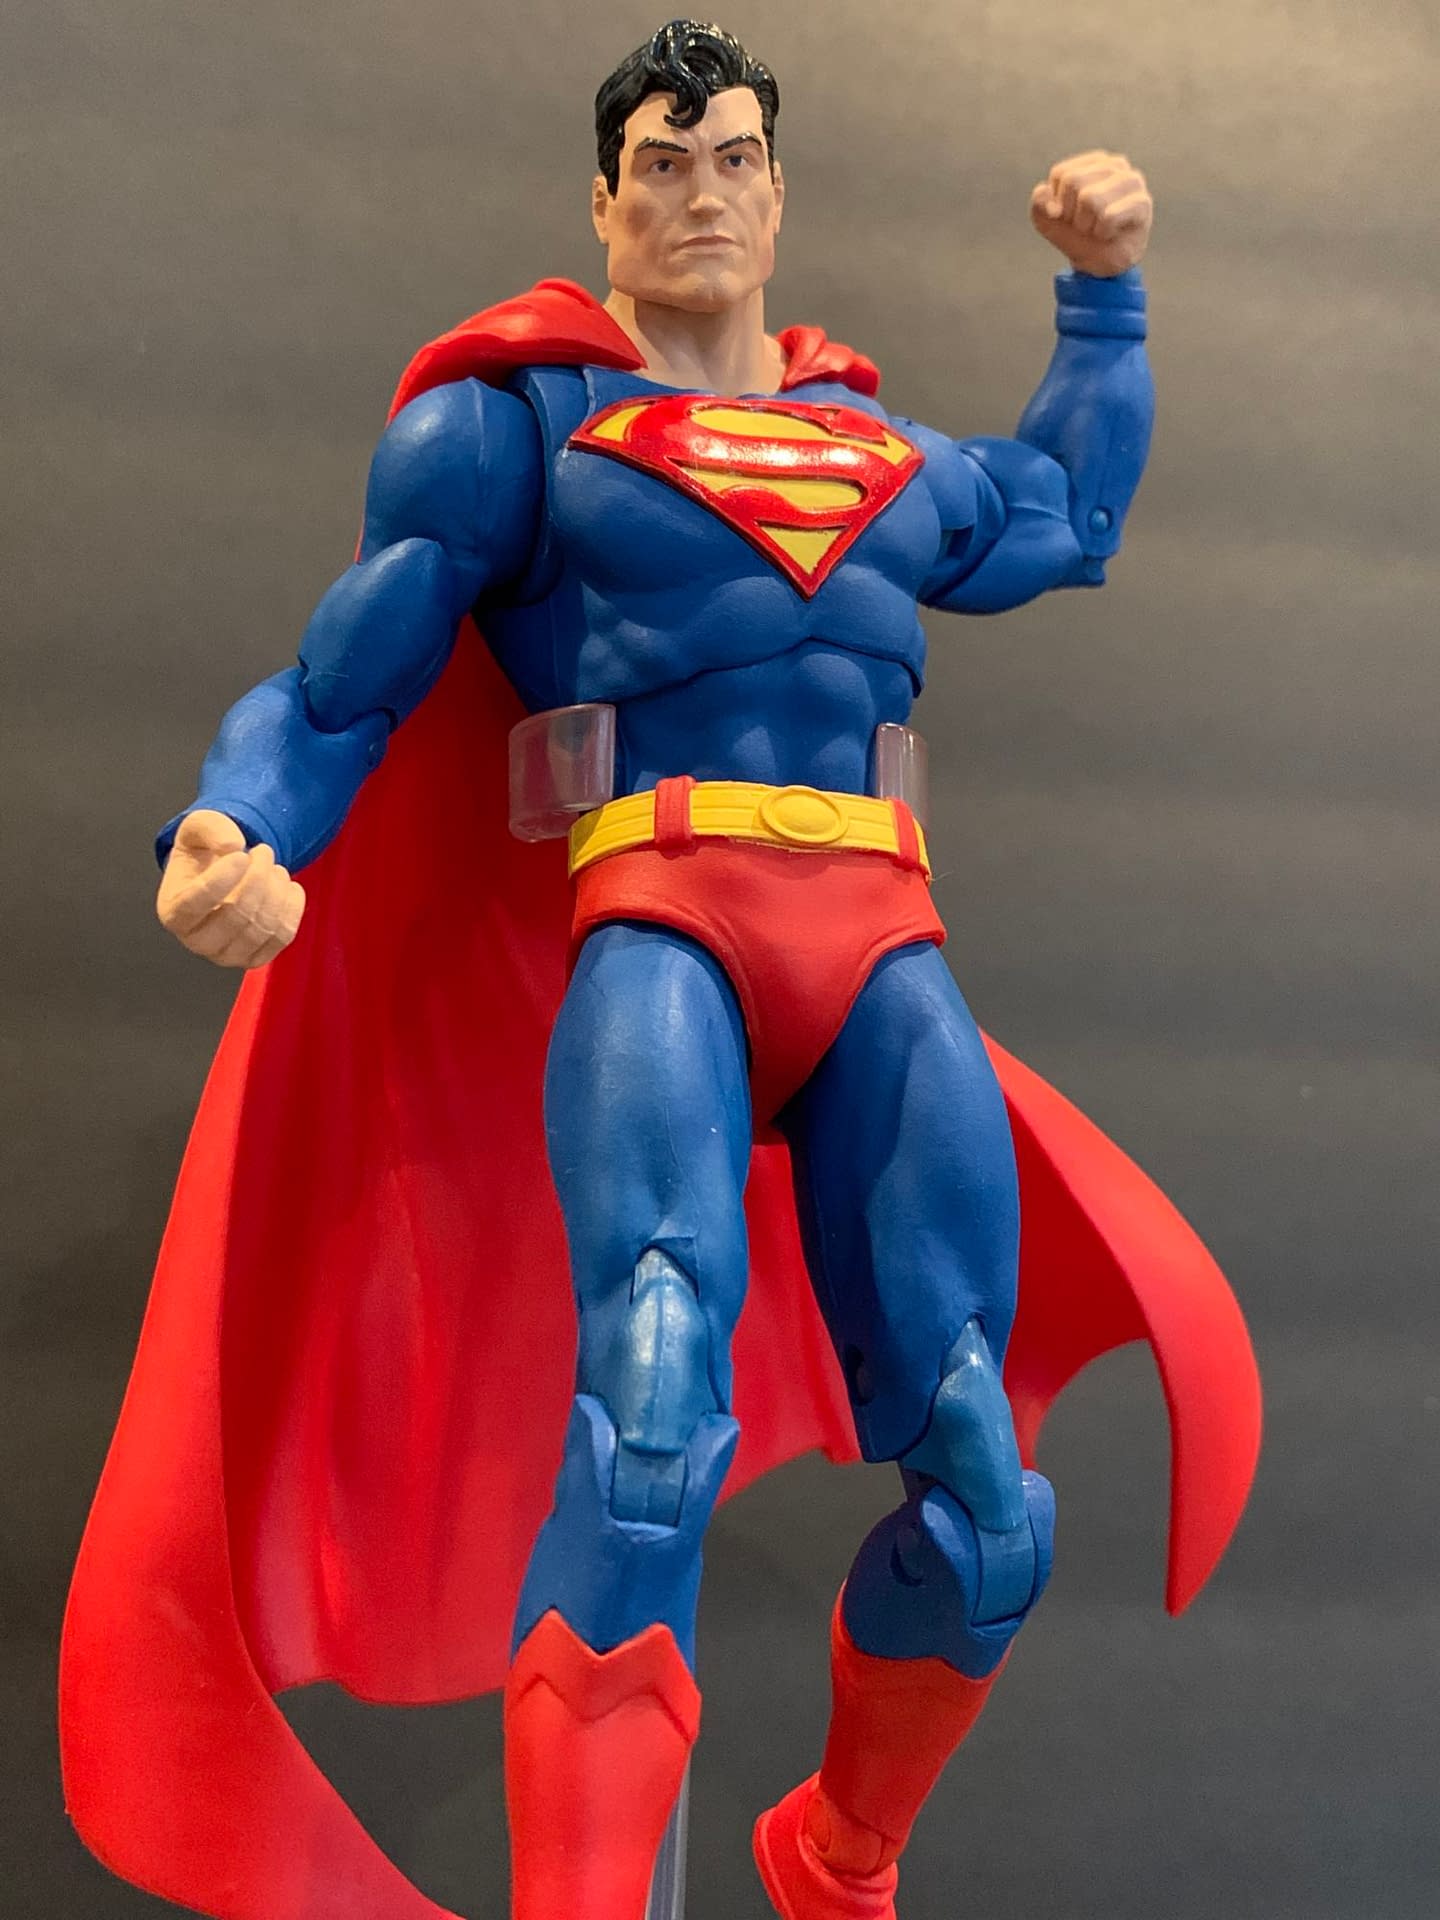 Let's Take a Look at McFarlane Toys New DC Multiverse Superman Figure - Img 6638